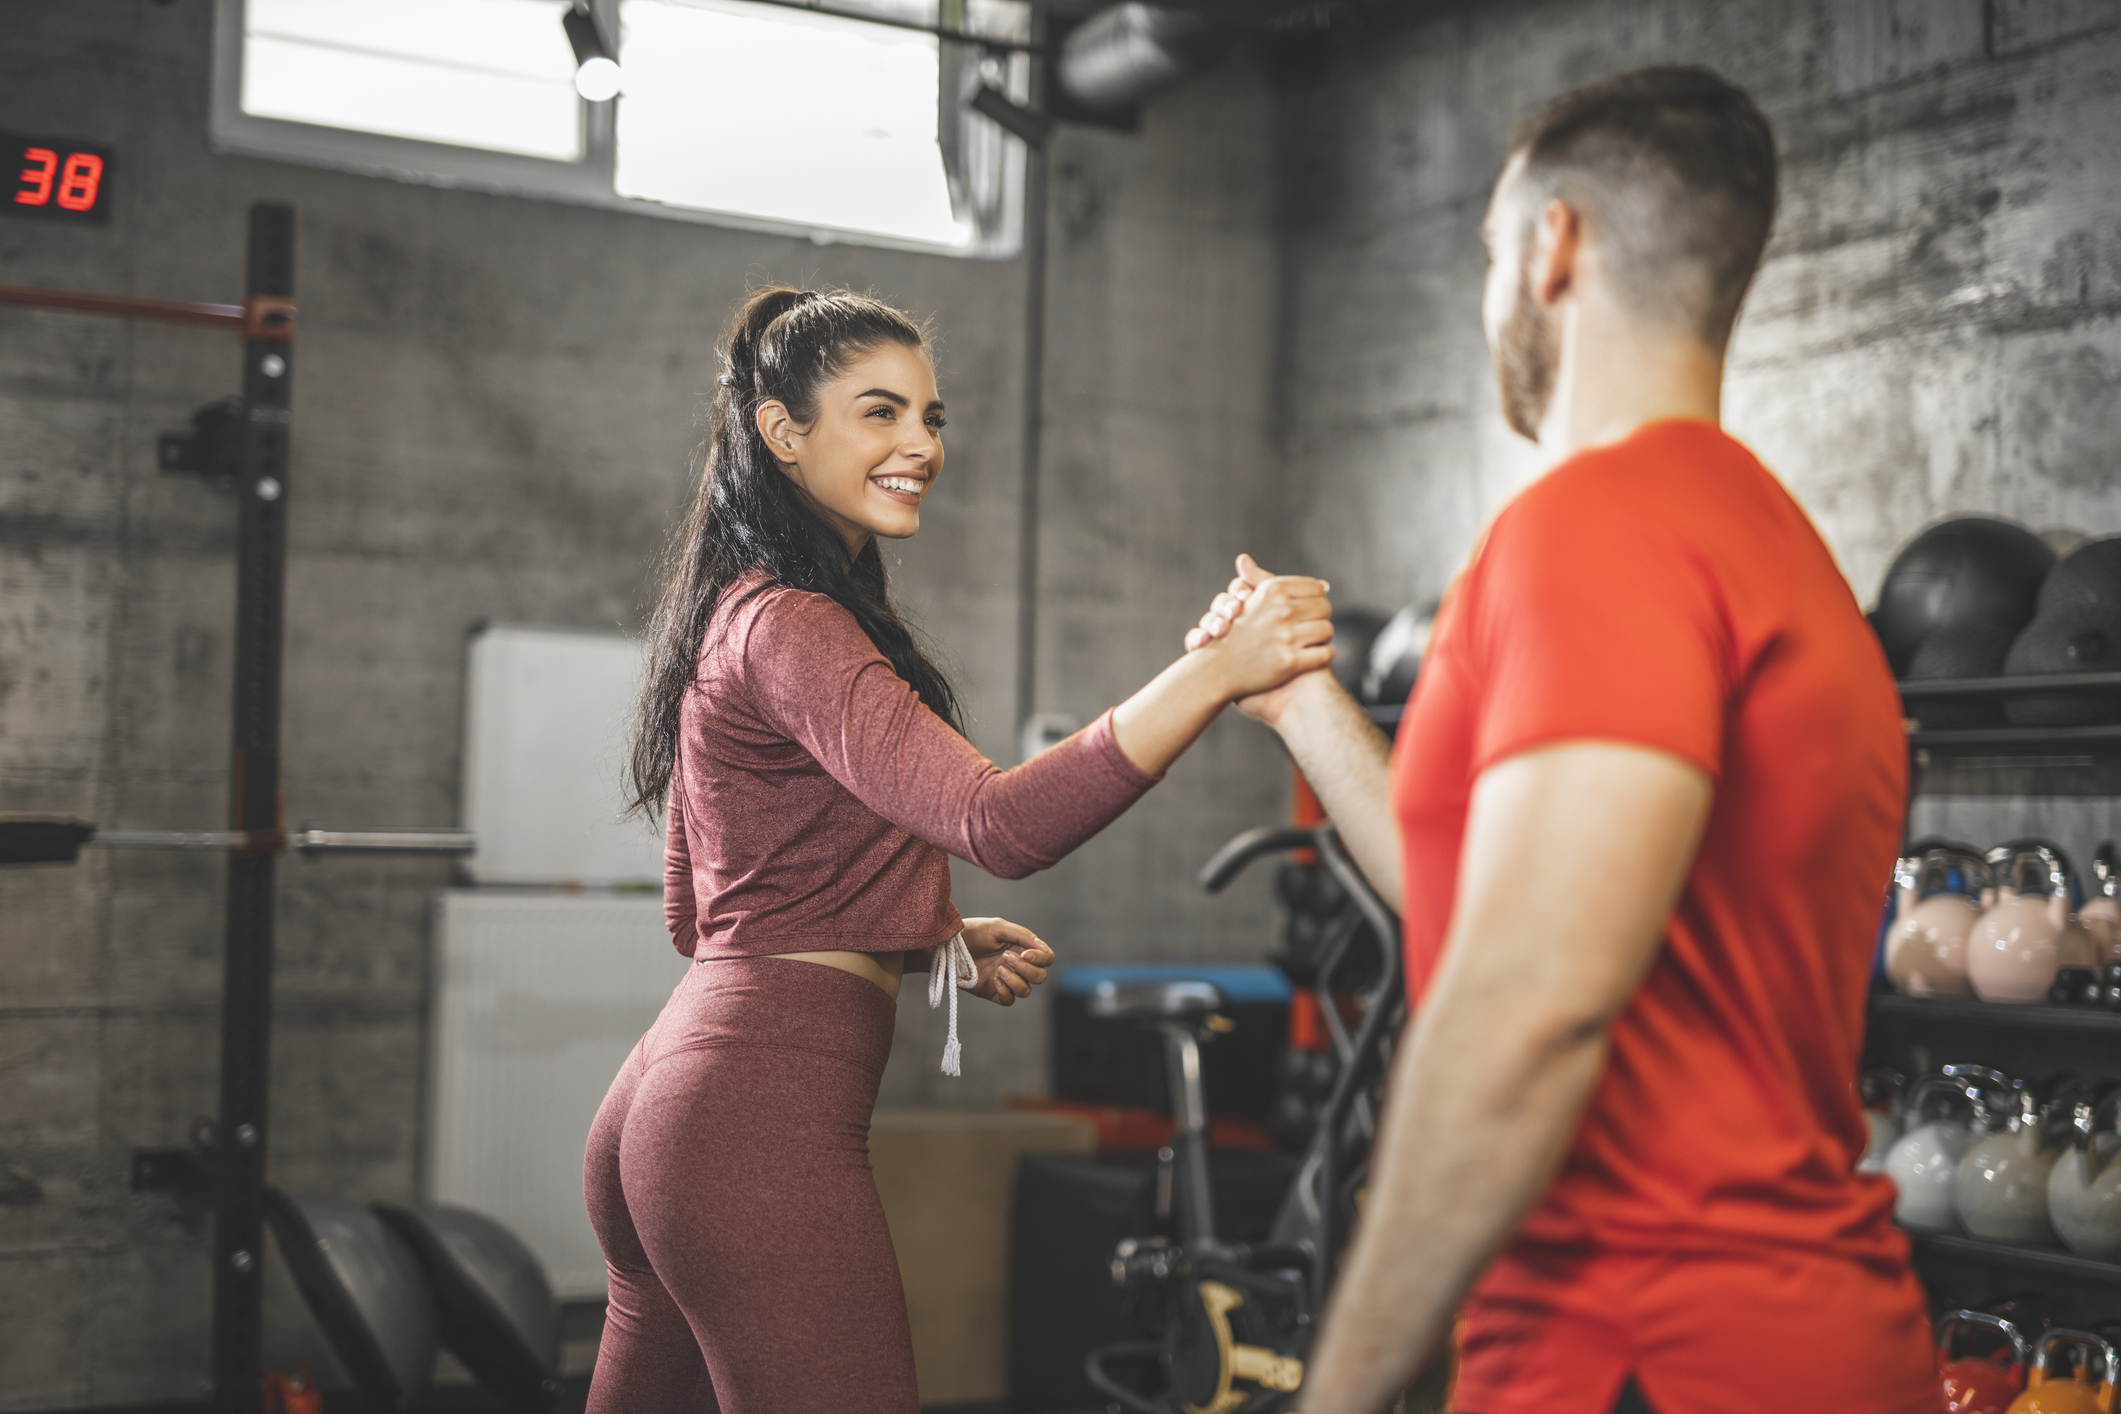 Young woman and man are shaking hands after an intense training in the gym. Focus on woman